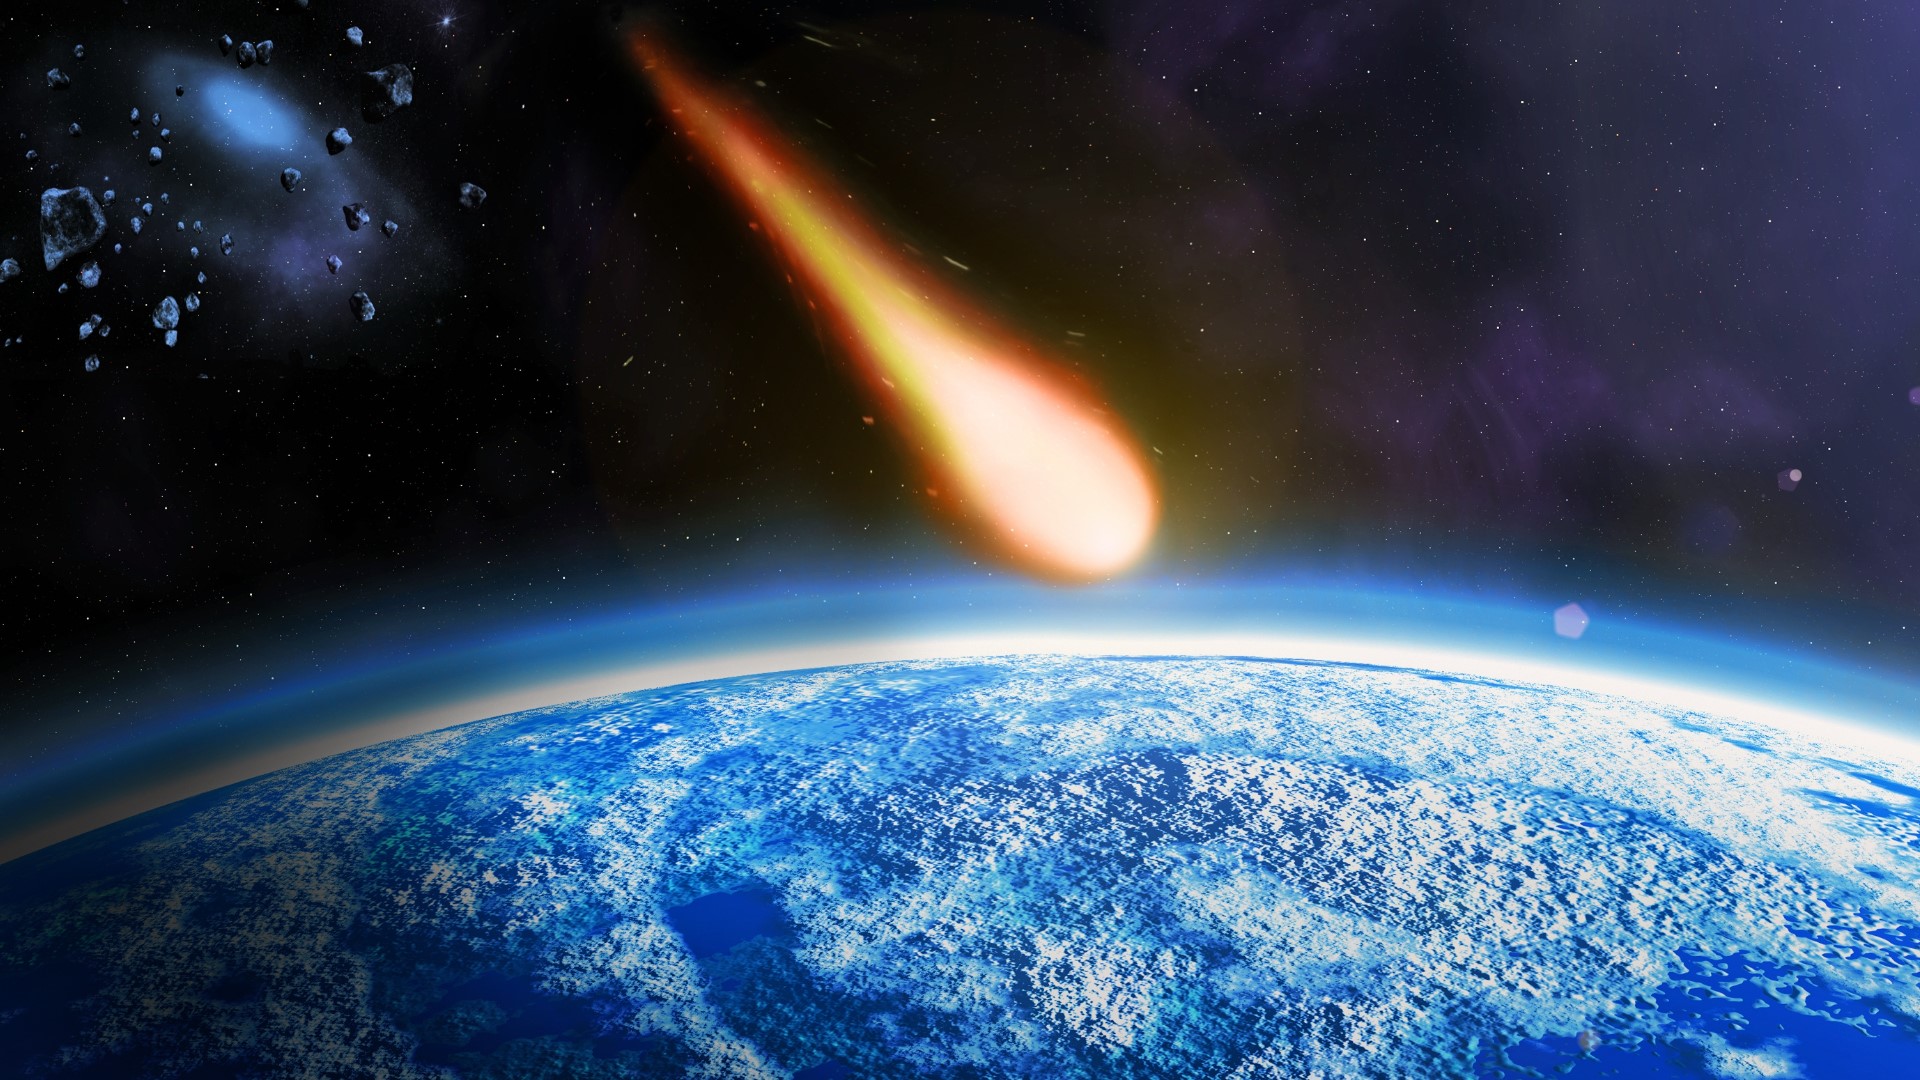 Researchers say they've found evidence that an asteroid or comet exploded over Kershaw County thousands of years ago, causing huge changes to life in that area.